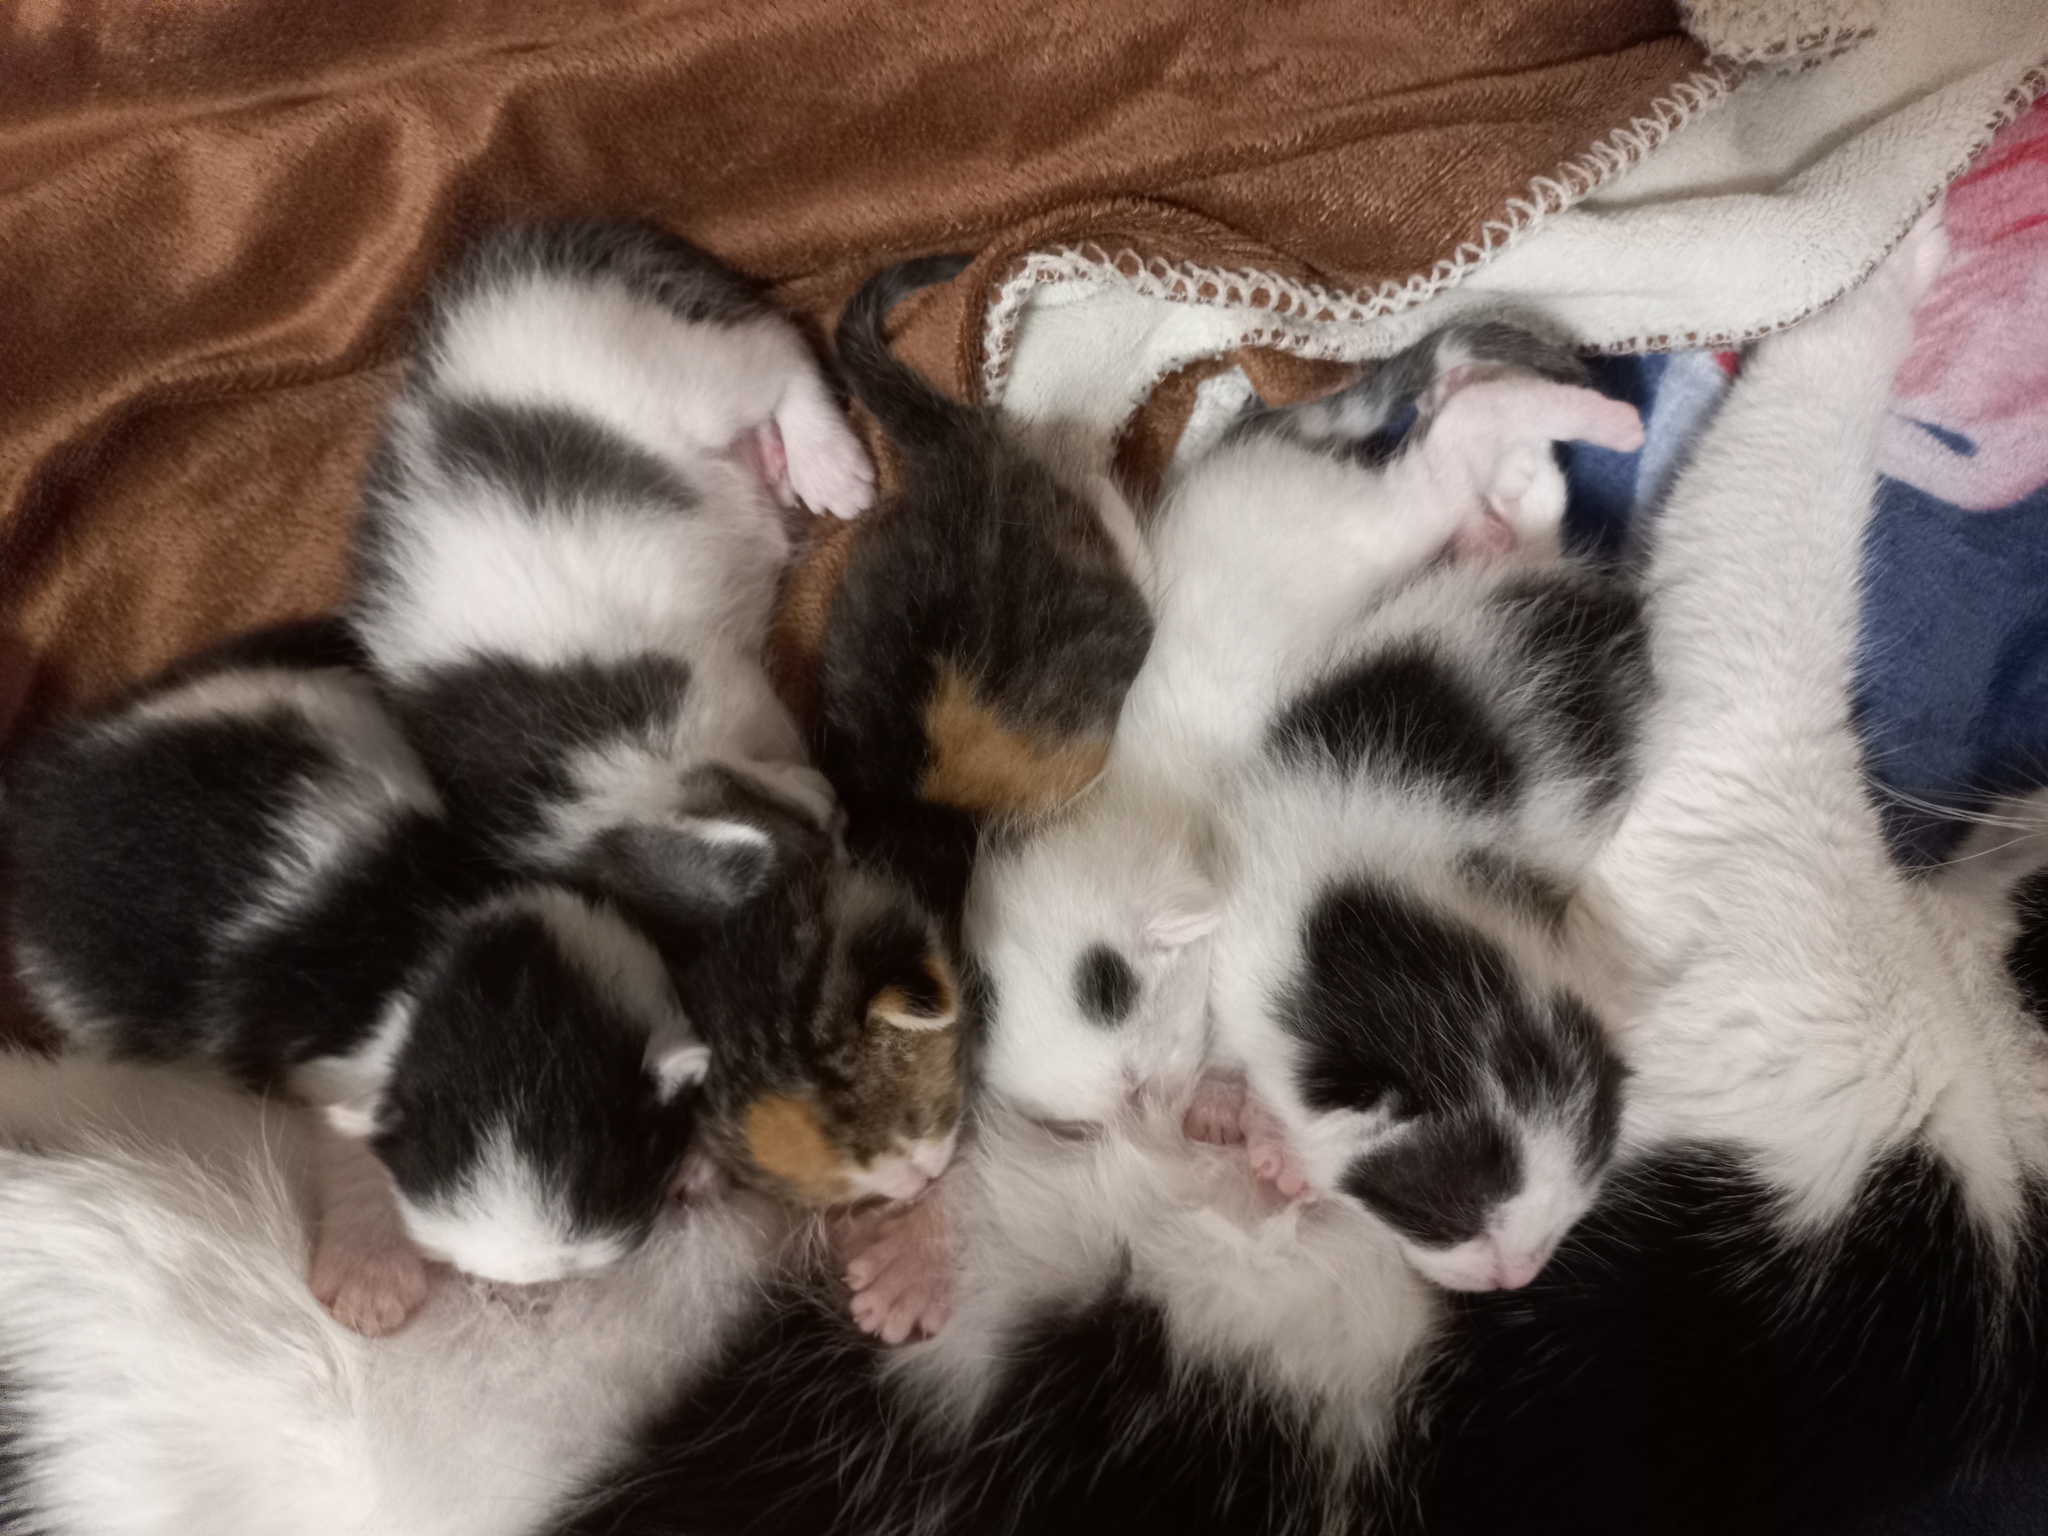 Kittens 14 days old - My, cat, Kittens, Milota, Pets, Animals, Cat pads, Pink, Black and white, Cat family, Tricolor cat, Longpost